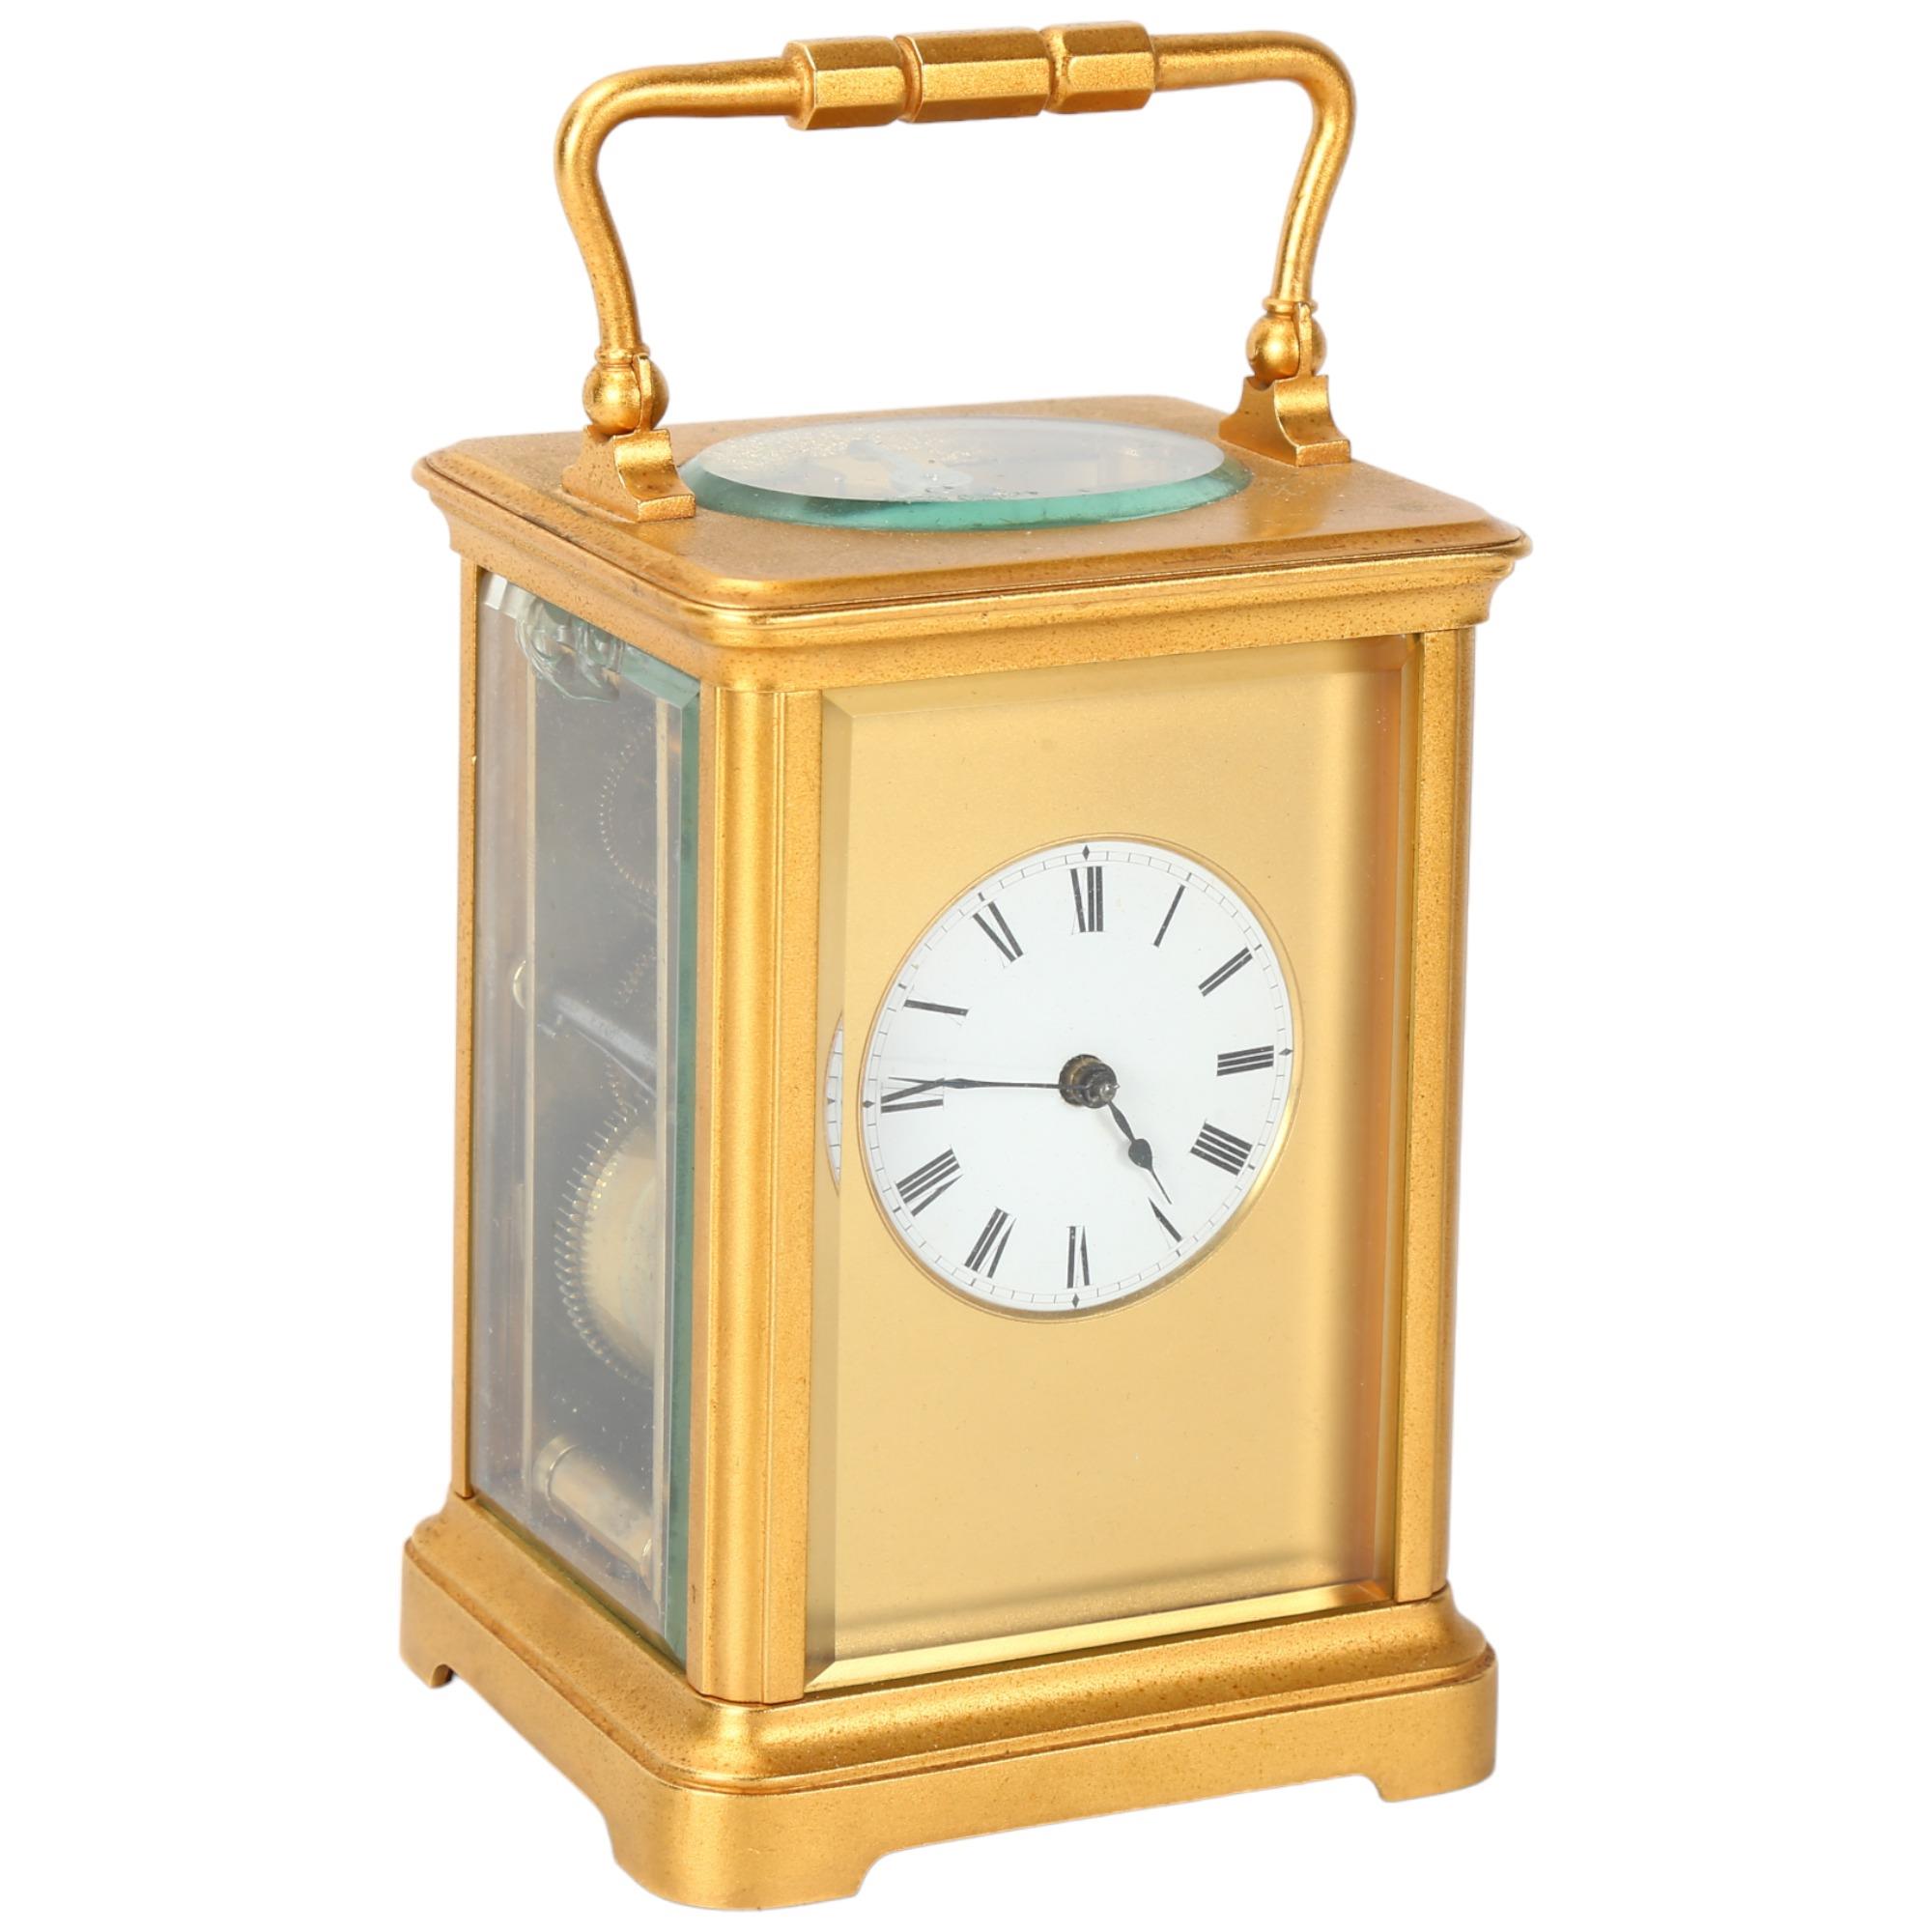 French gilt-brass carriage clock, enamel circular dial in gilded surround, 8-day movement striking